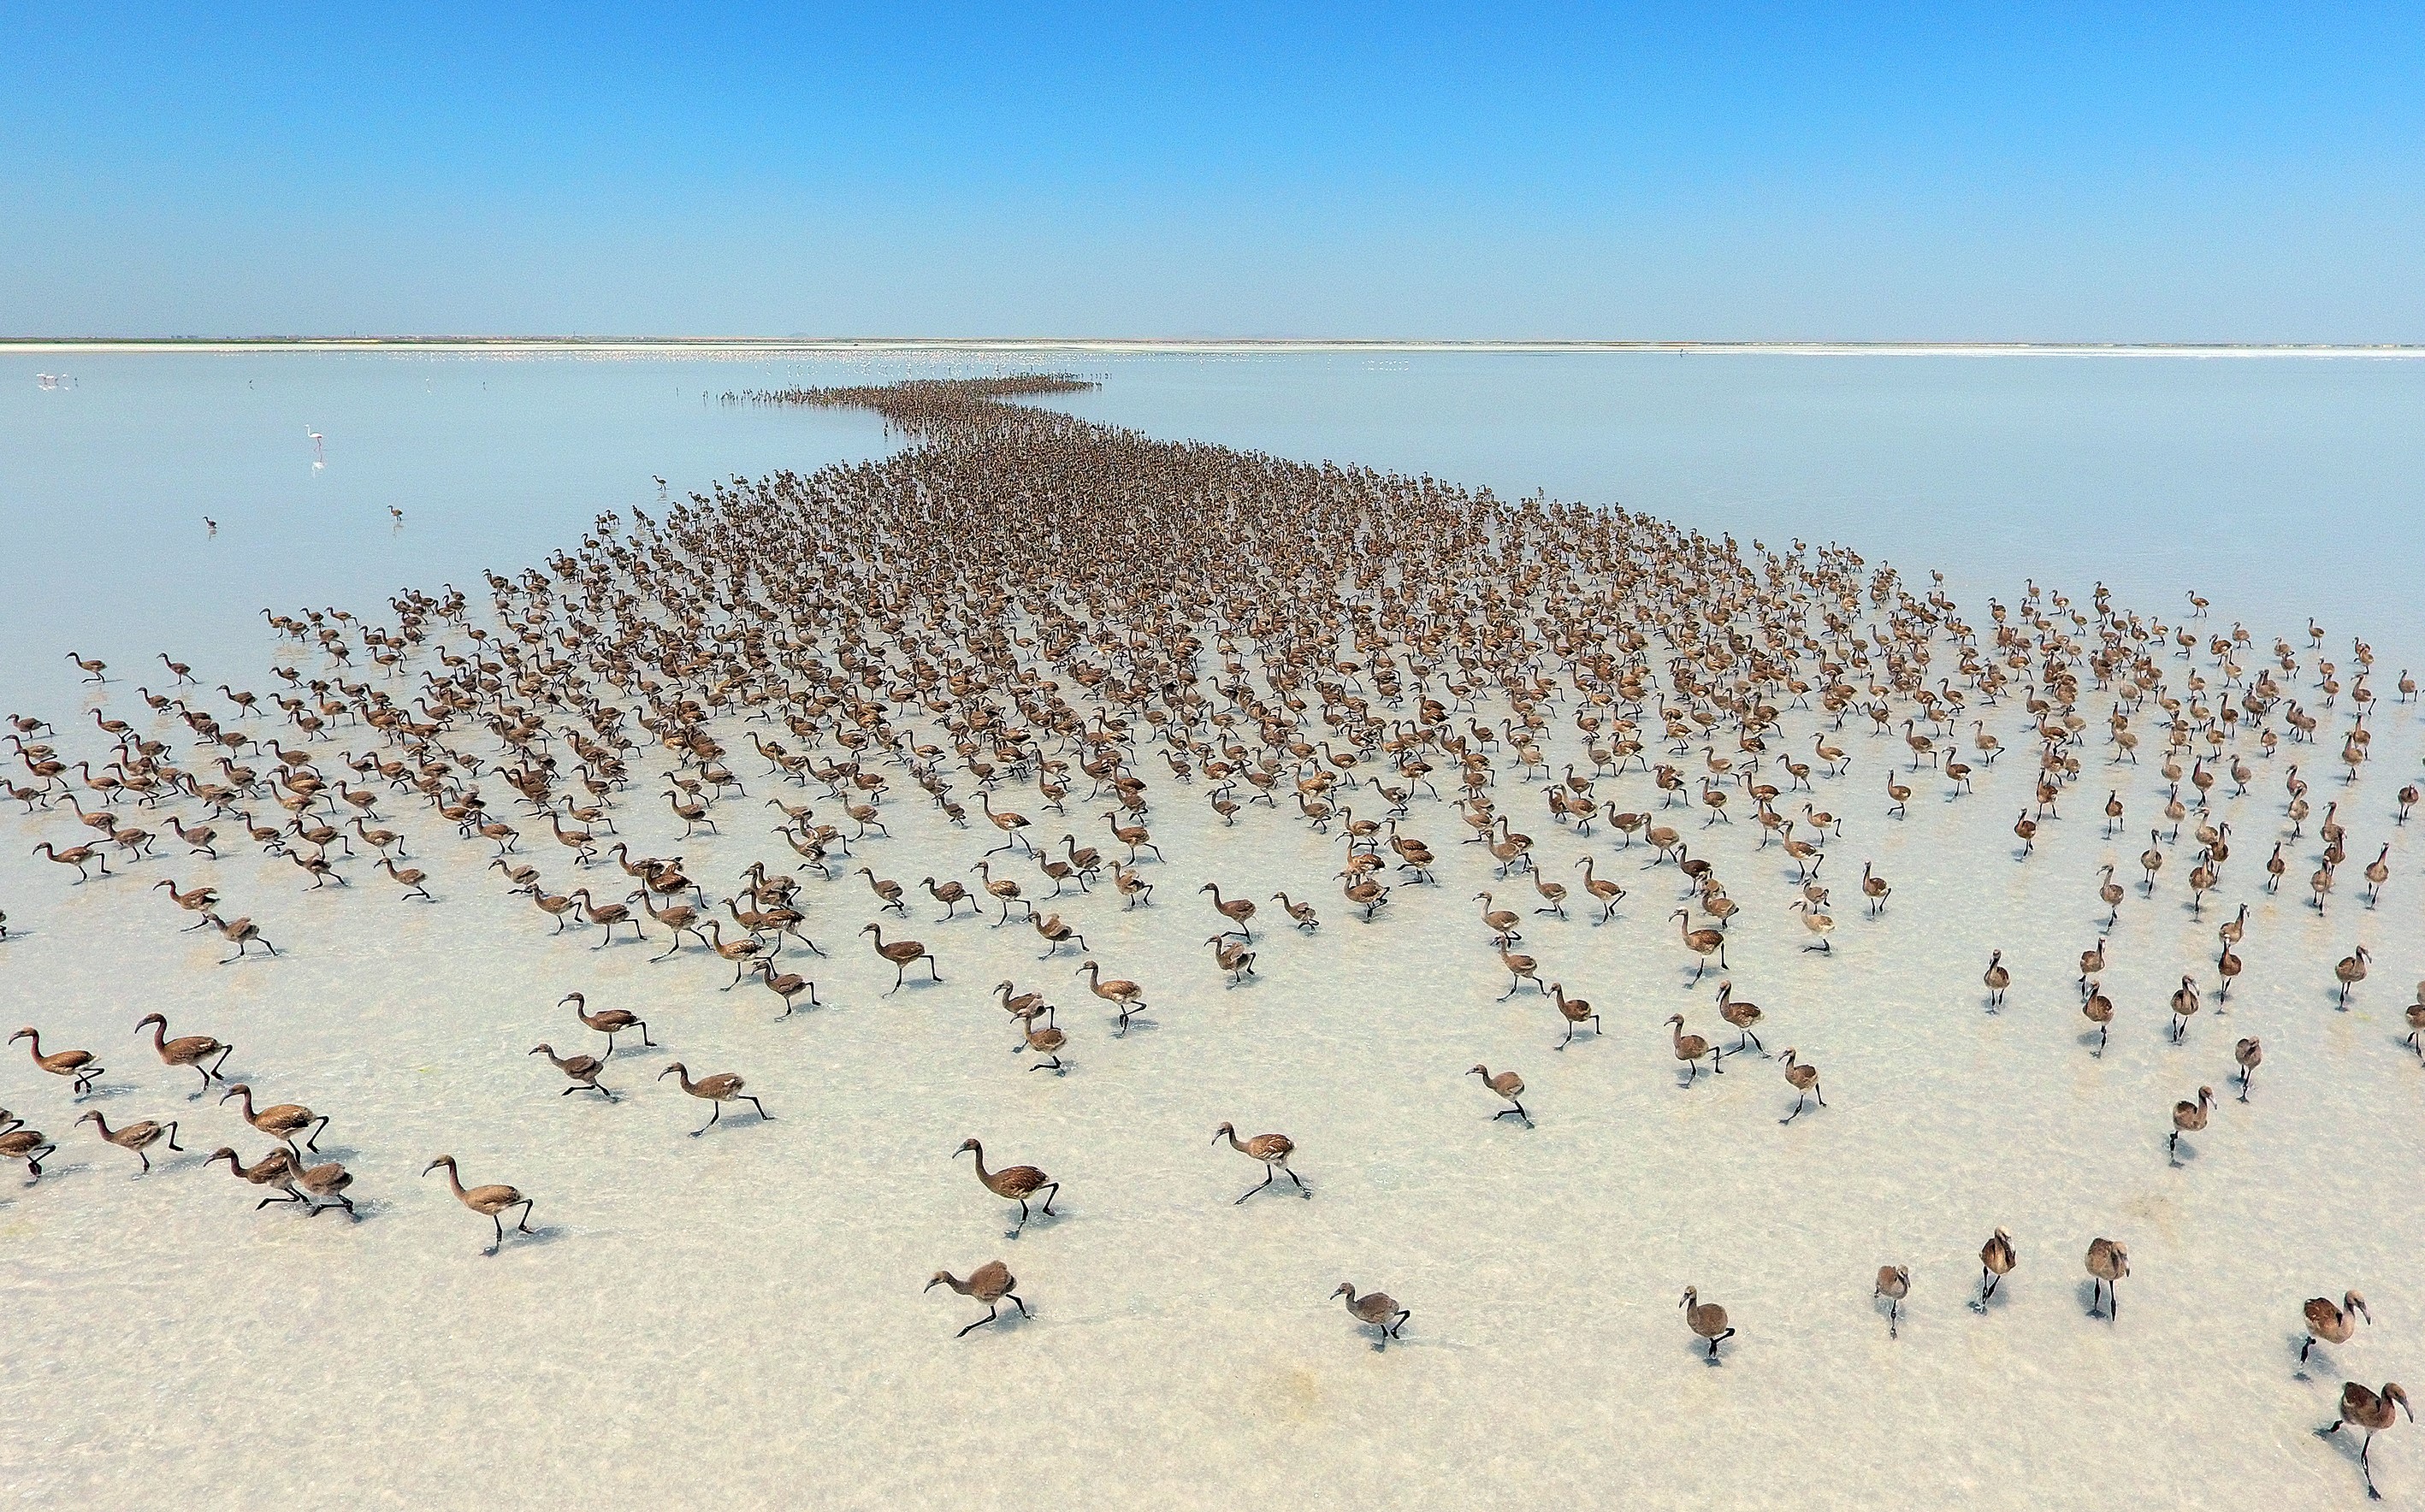 Flamingos are seen after thousands of flamingo chicks have emerged from their nests at Lake Tuz in Turkey on June 28, 2016. (Murat Oner Tas—Getty Images)